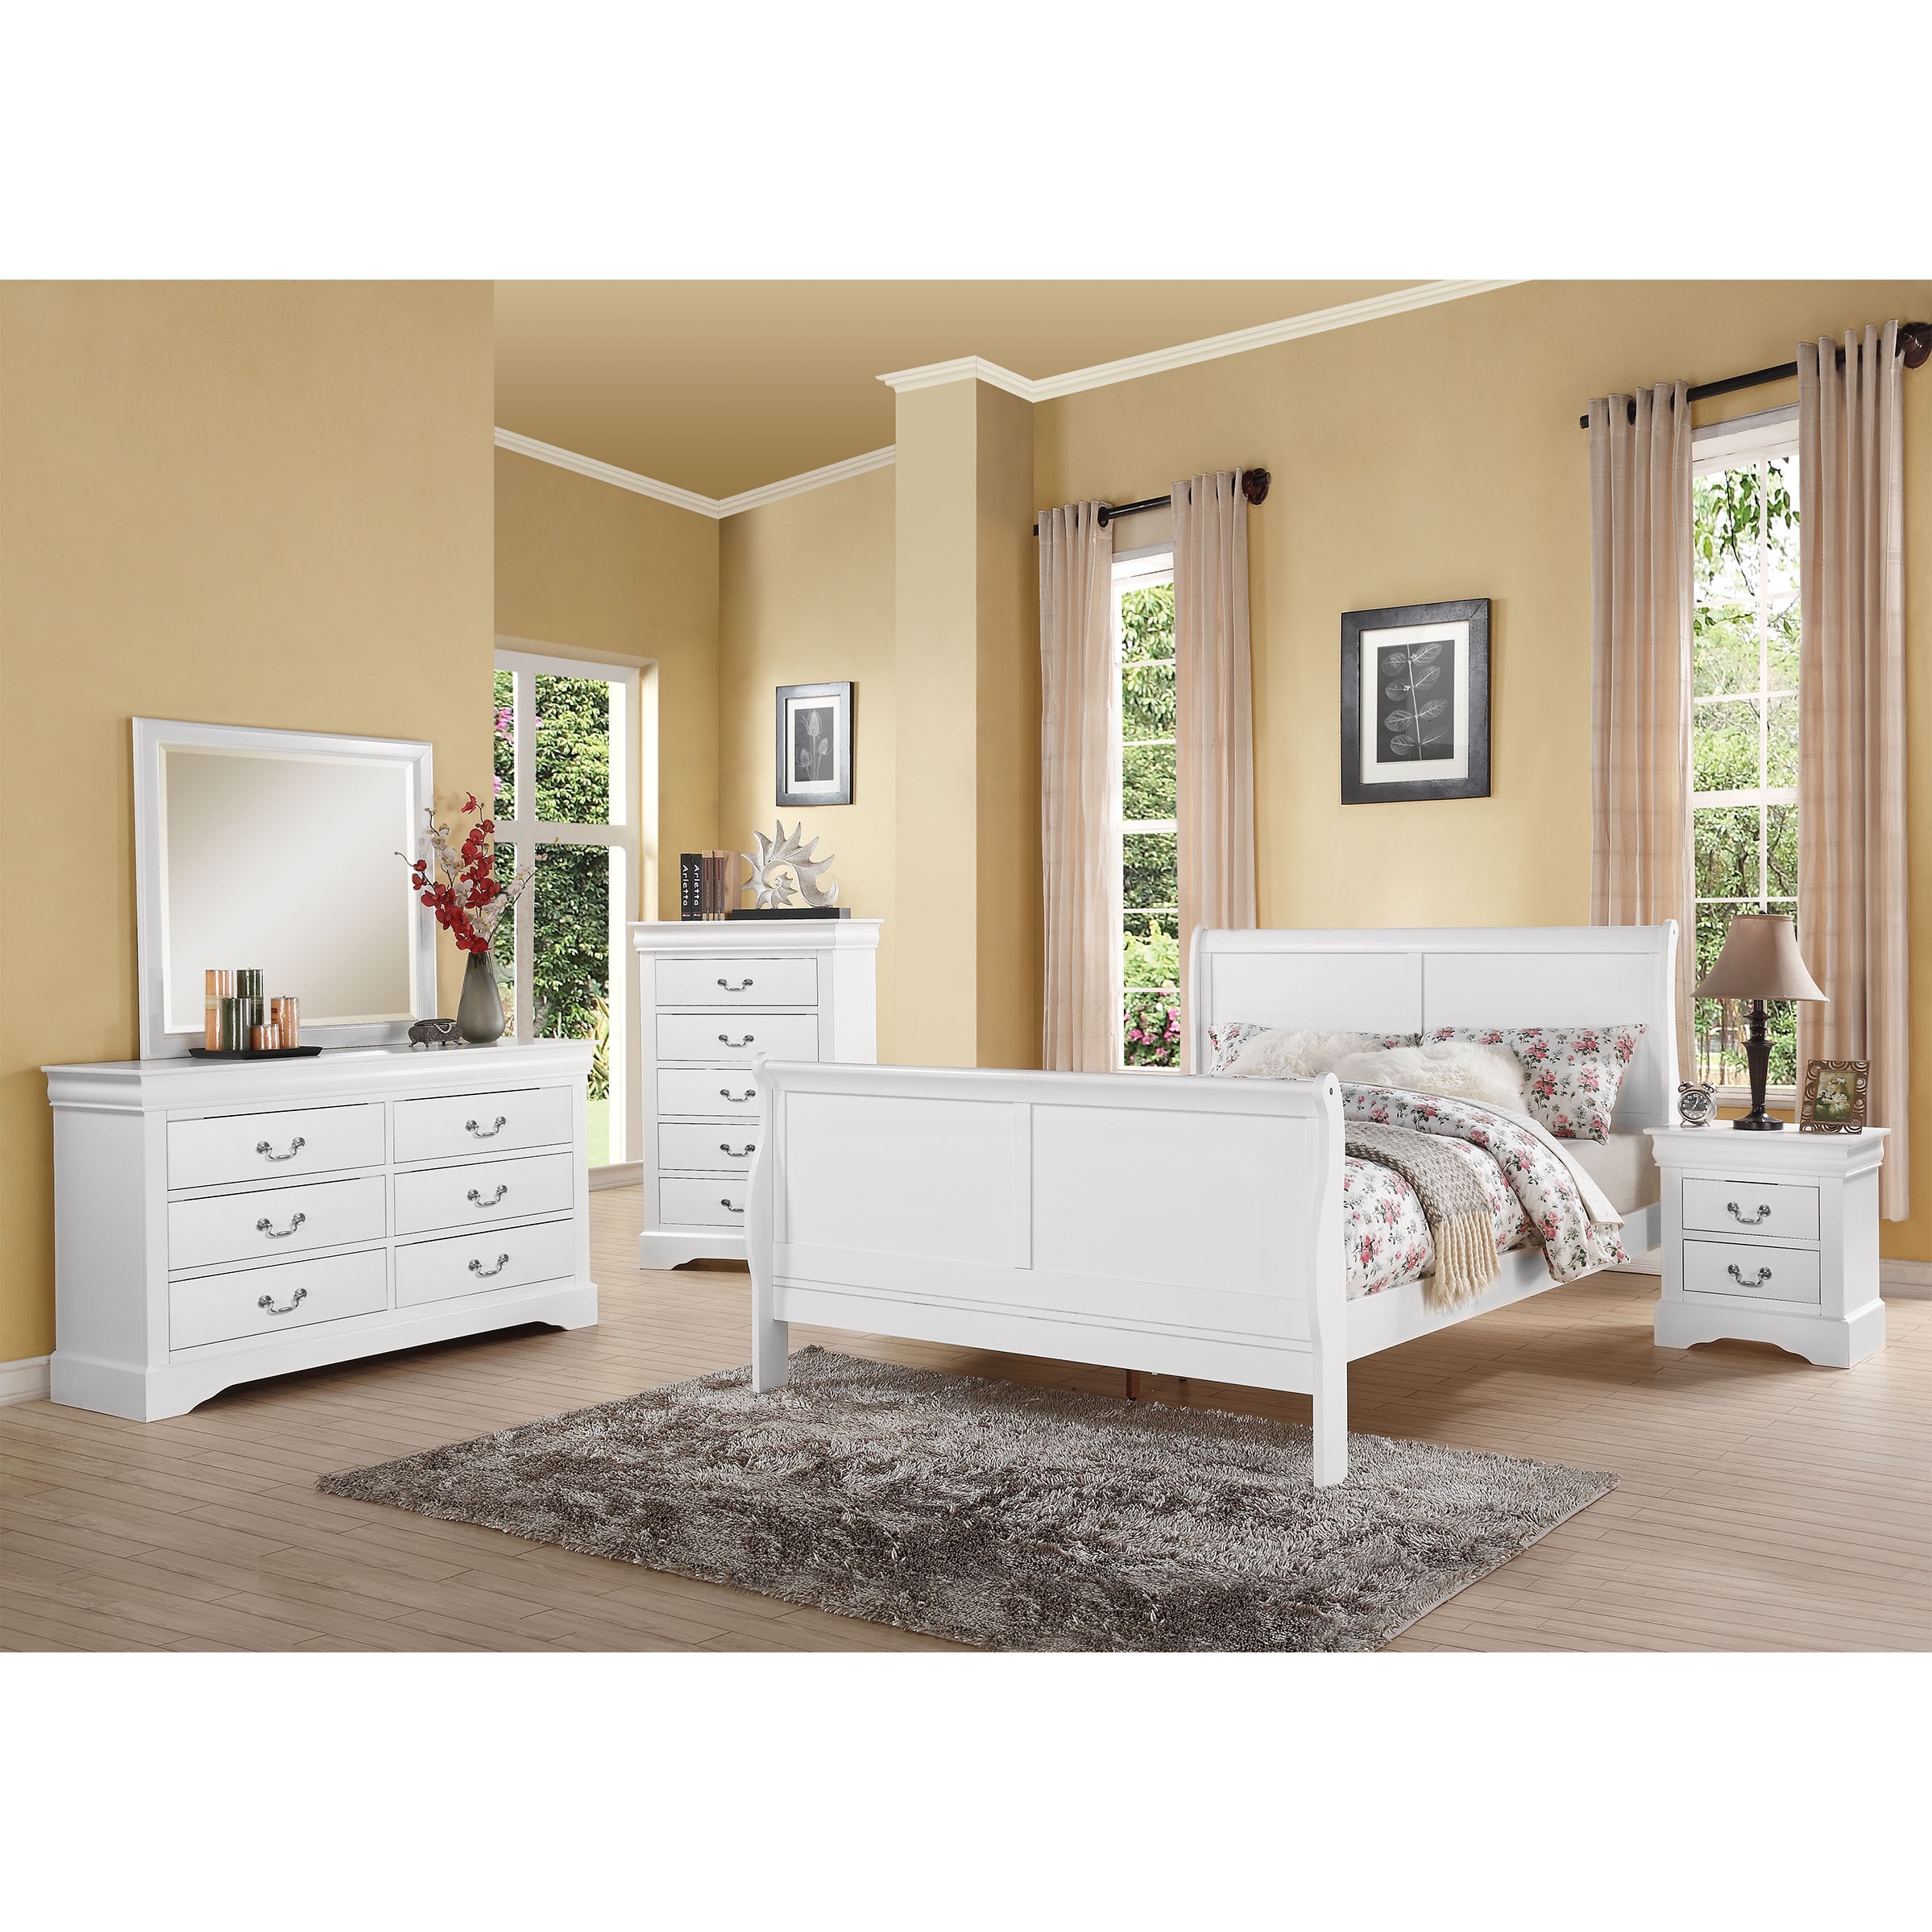 Contemporary Black Queen 6pcs Bedroom Set by Acme Louis Philippe III 19500Q-6pcs  – buy online on NY Furniture Outlet